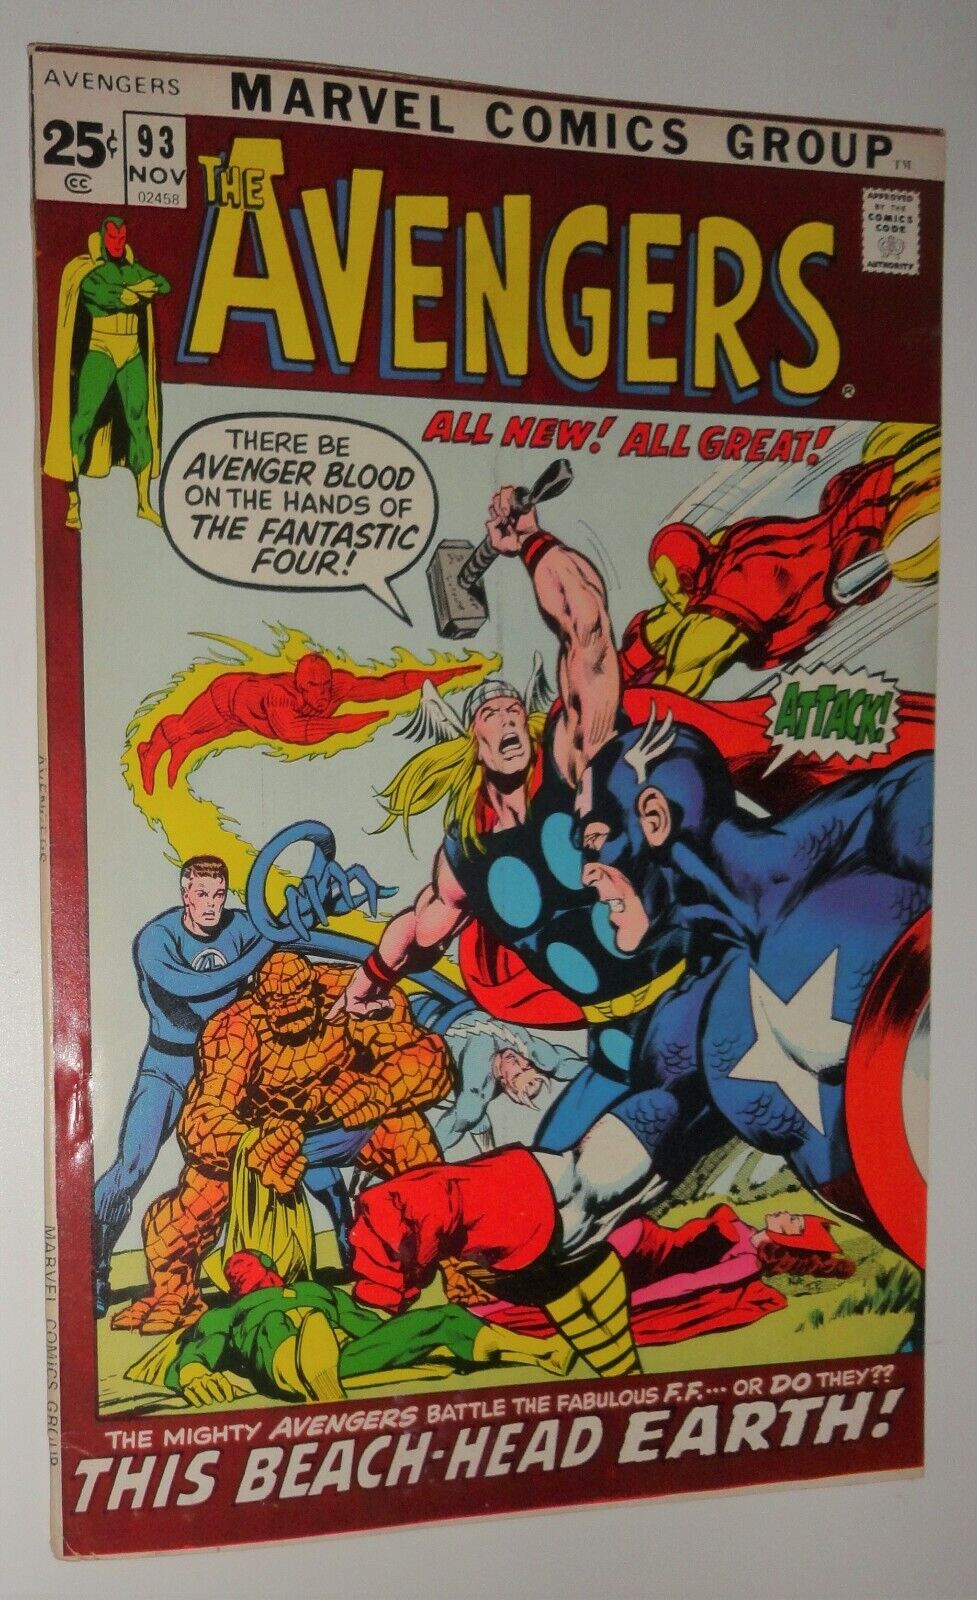 AVENGERS #93 52 PAGE GIANT NEAL ADAMS CLASSIC VF+ 8.5 1971  RARE IN HIGH GRADE